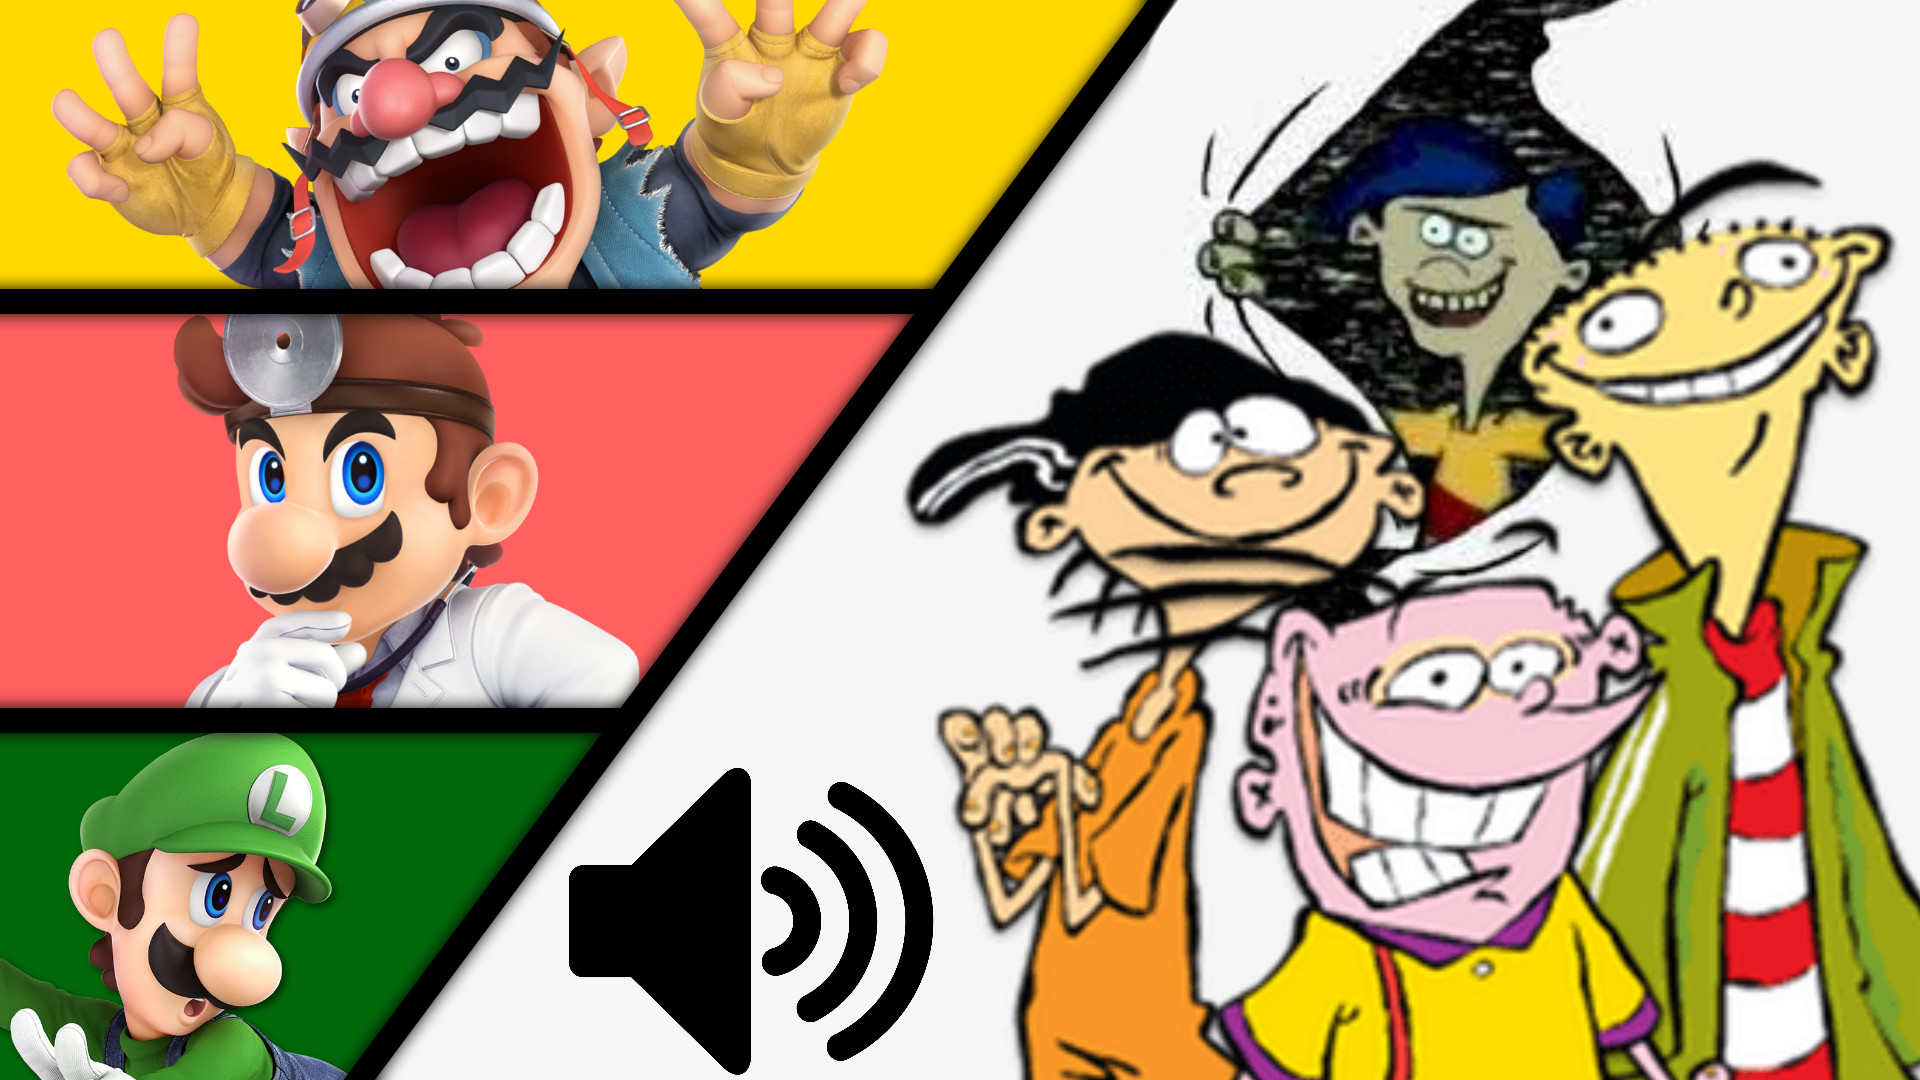 Ed, Edd, n Eddy / Rolf SFX and Voice pack [Super Smash Bros. Ultimate]  [Mods]